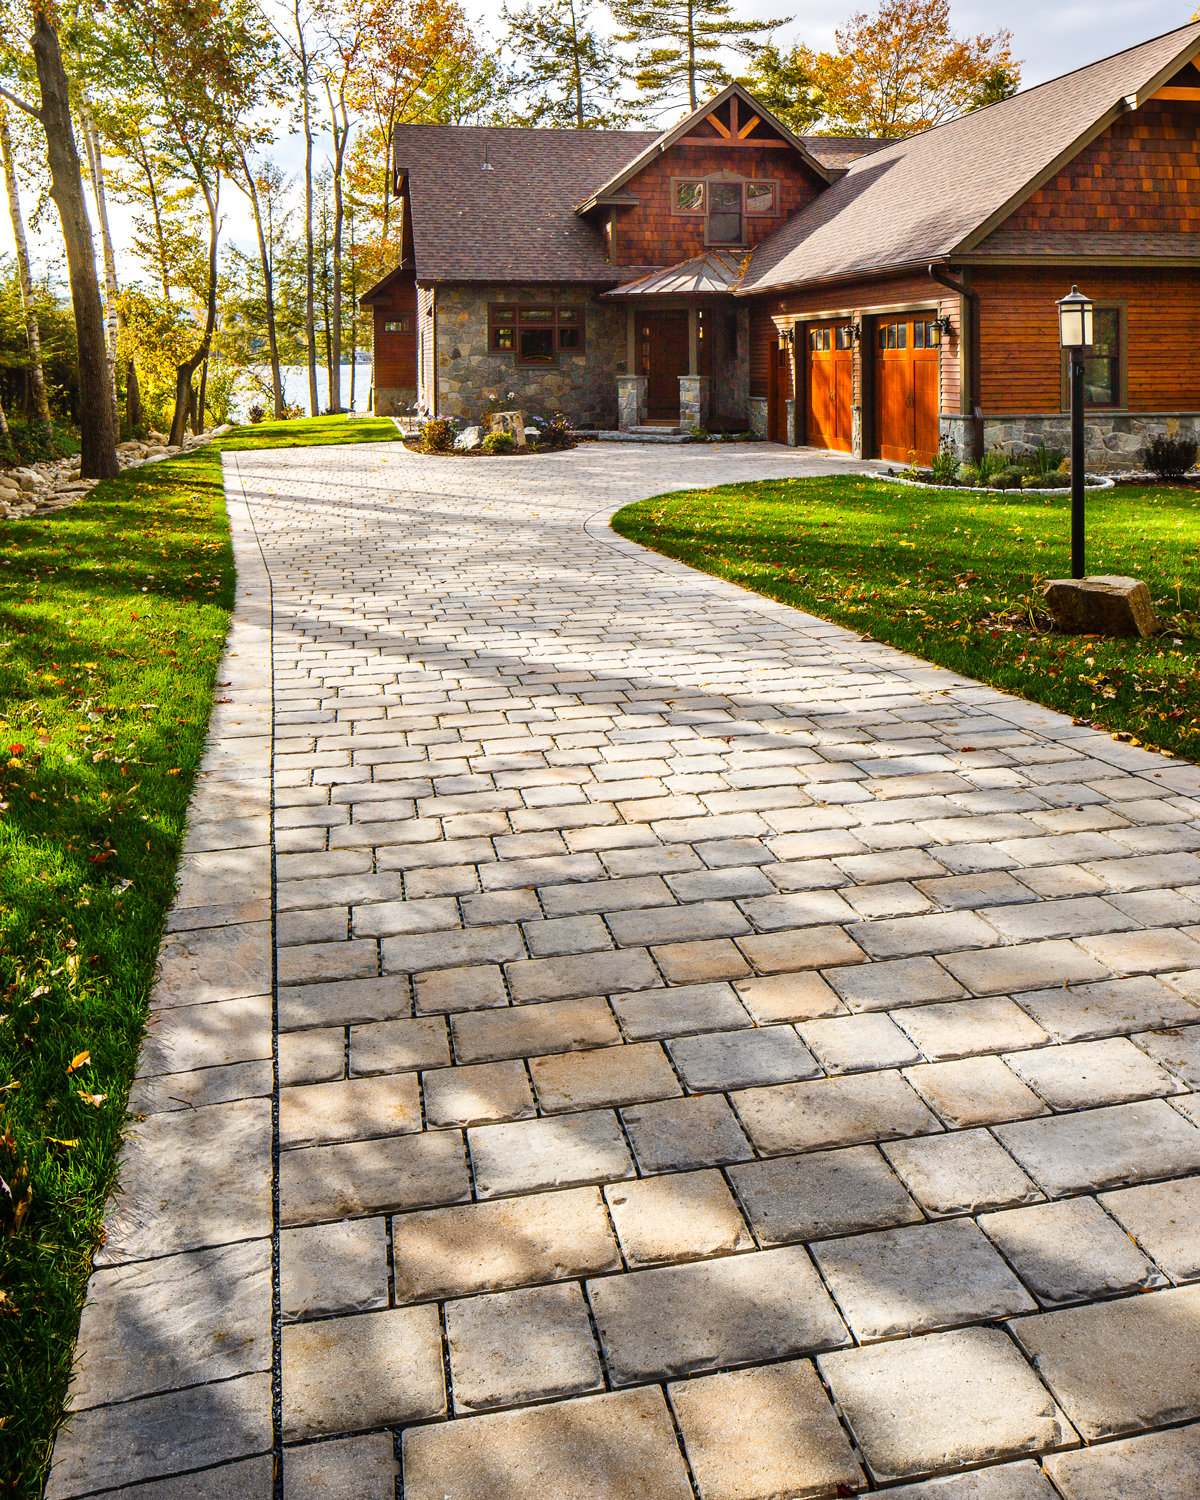 List 102+ Images pictures of driveways with pavers Full HD, 2k, 4k